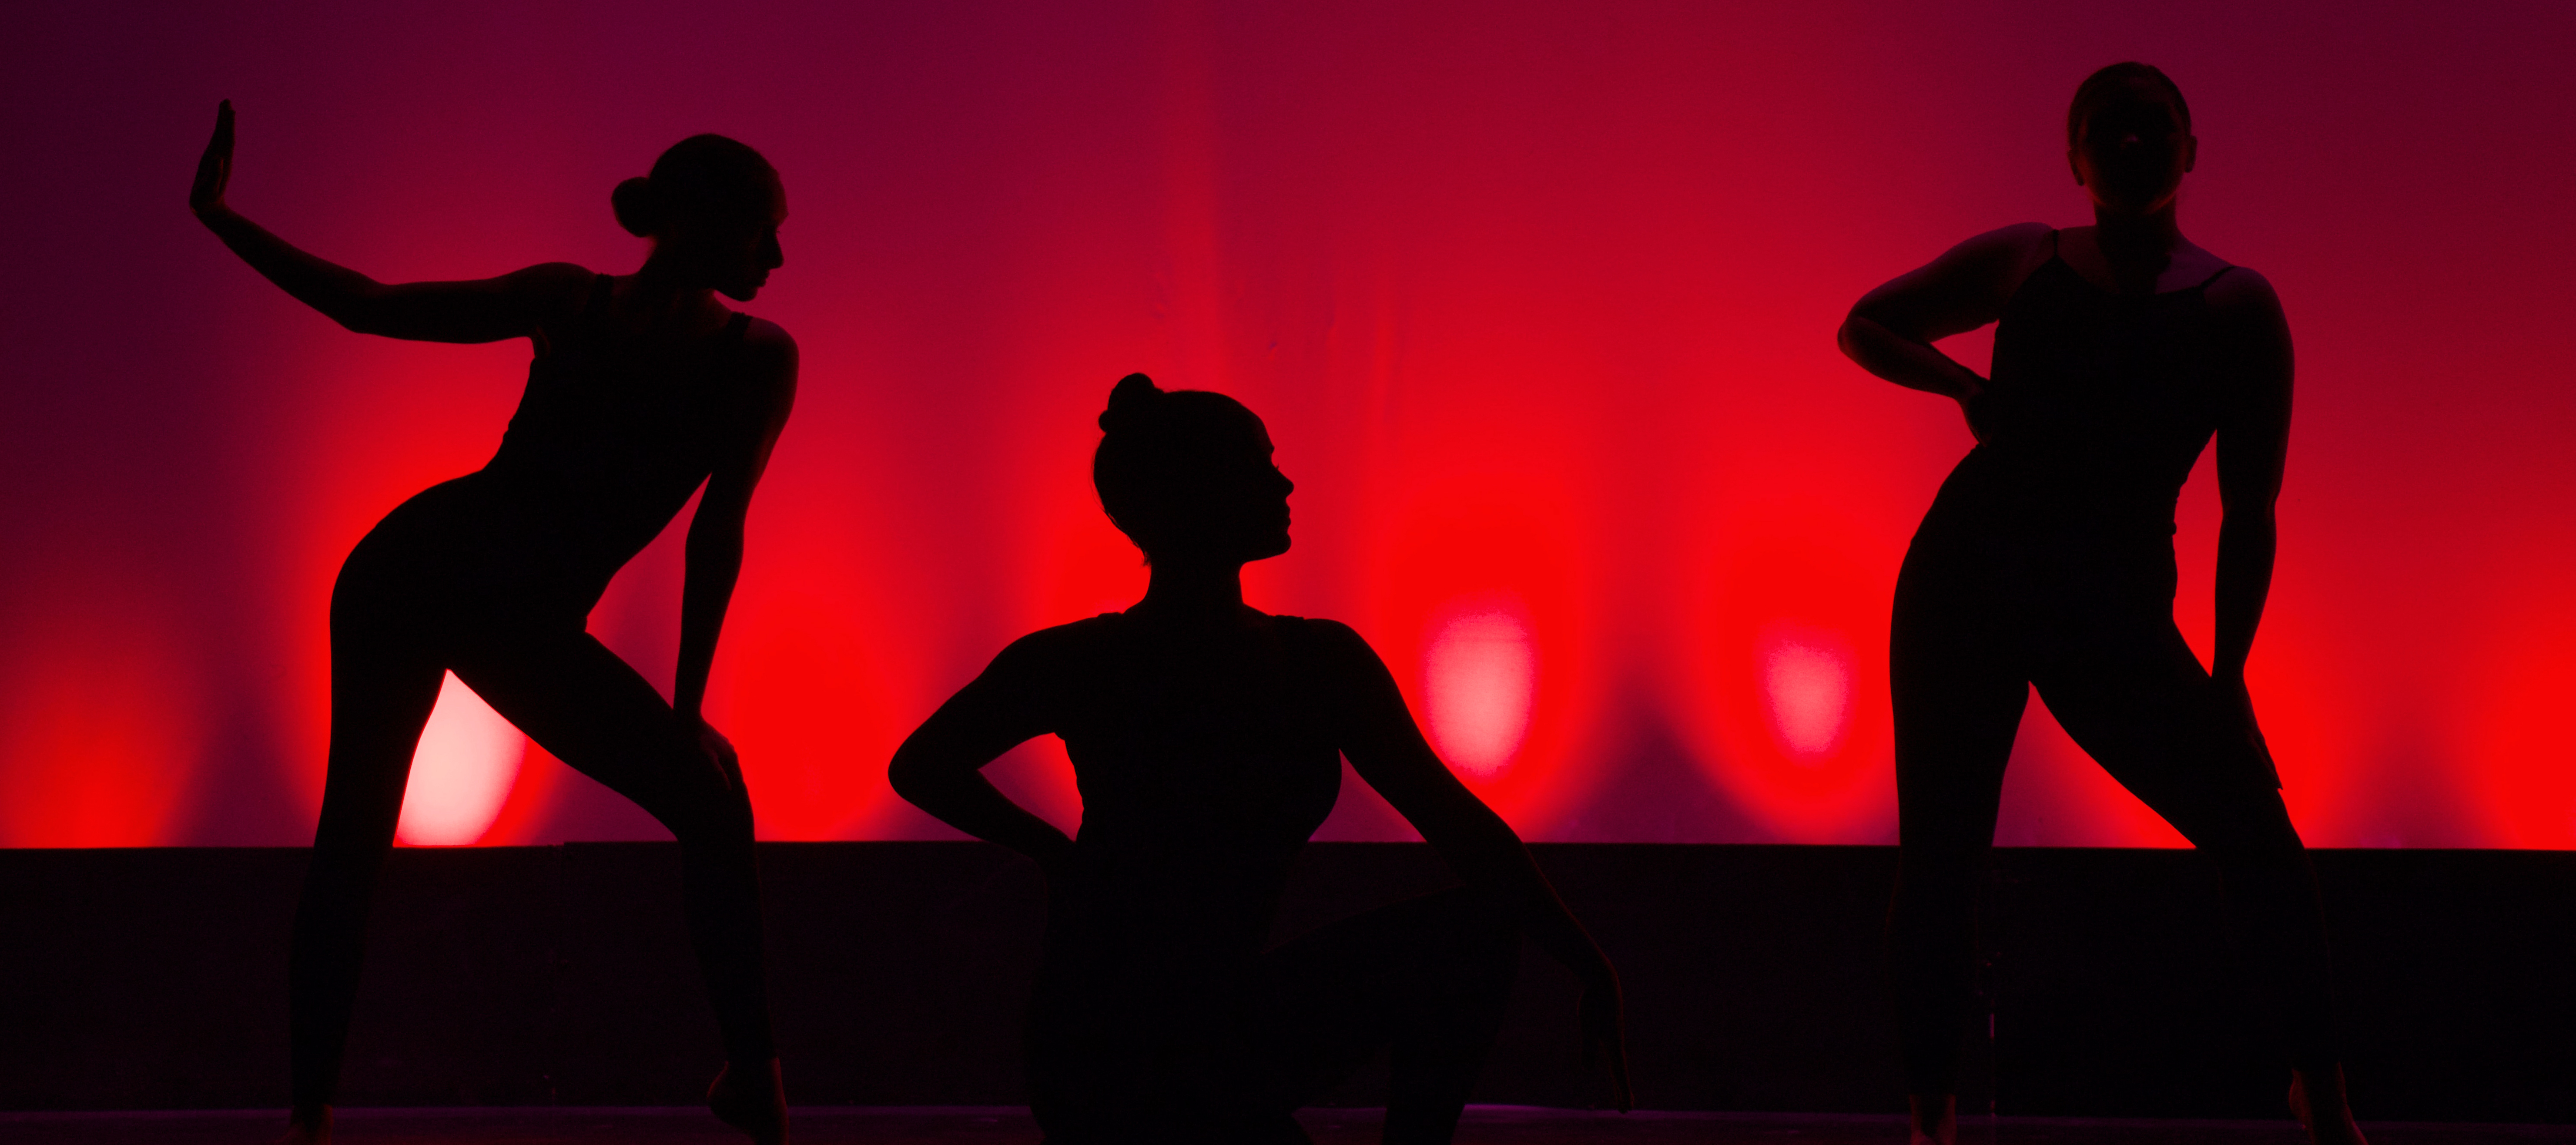 Three women dancers are silhouetted before a red background. The left-most dancer stands with one palm out away from herself and with the other on her knee. The middle danger kneels in profile. The right-most dancer stands with one hand on her hip and the other on her thigh.